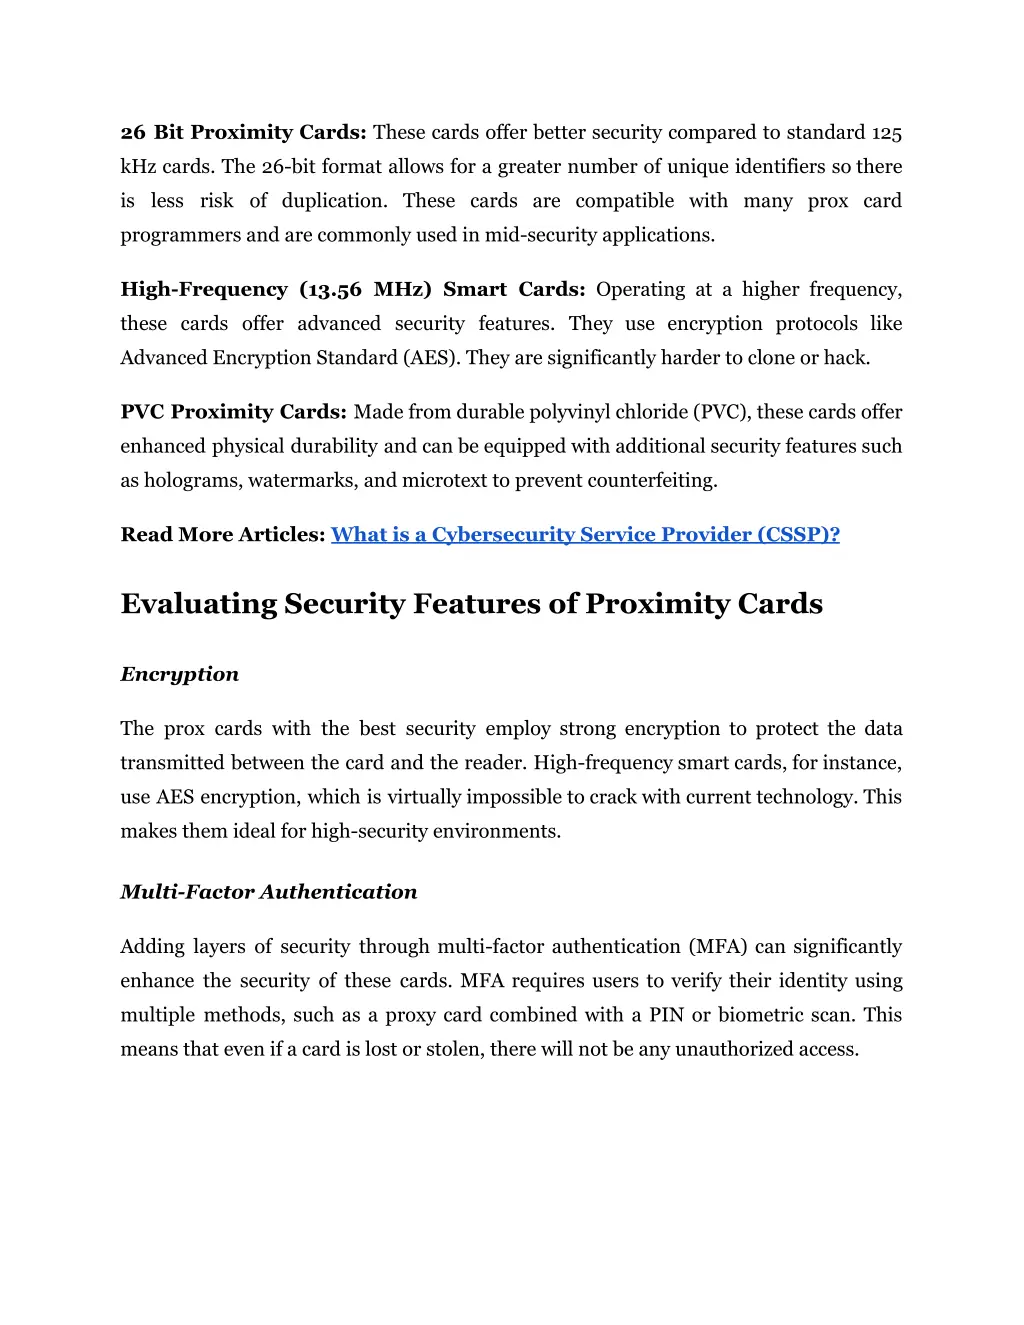 26 bit proximity cards these cards offer better